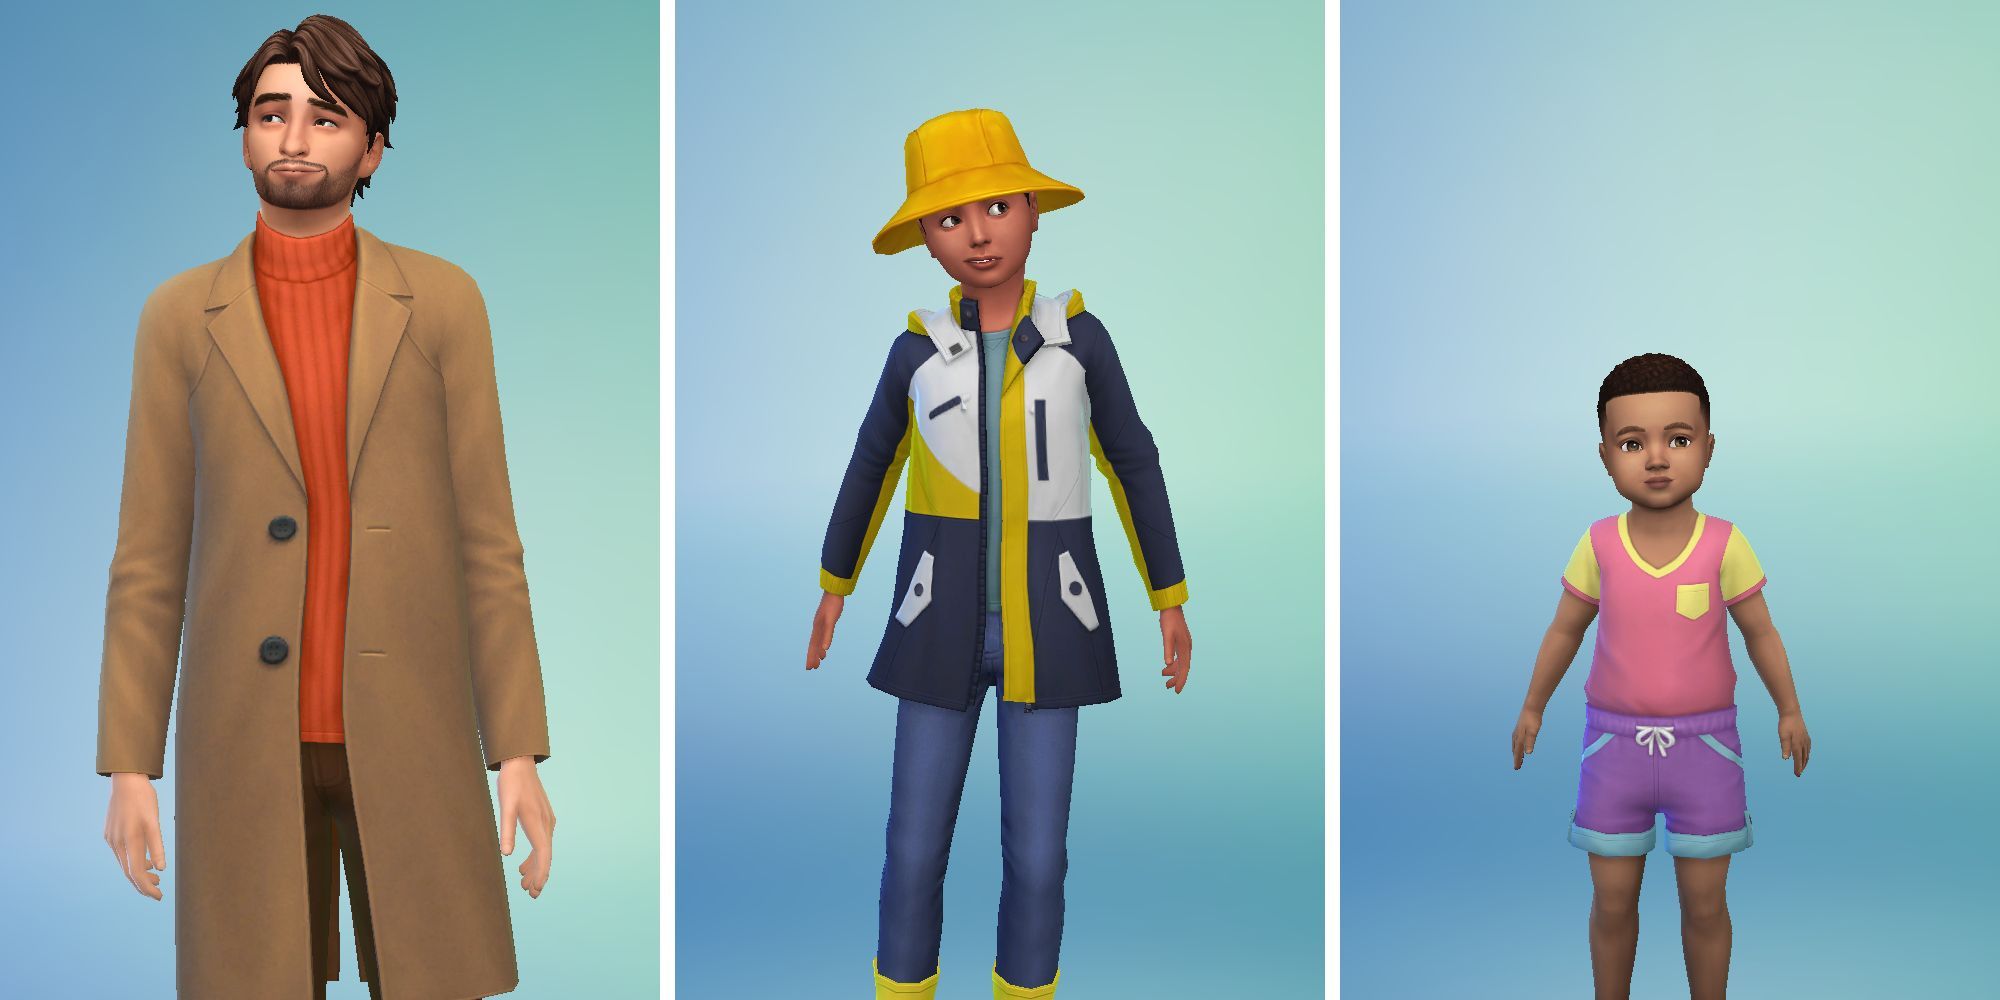 Three images of Sims in Sims 4 Create A Sim. A Sim in a tan trench coat, an child in a rain jacket and hat, and a toddler in a pink swim outfit